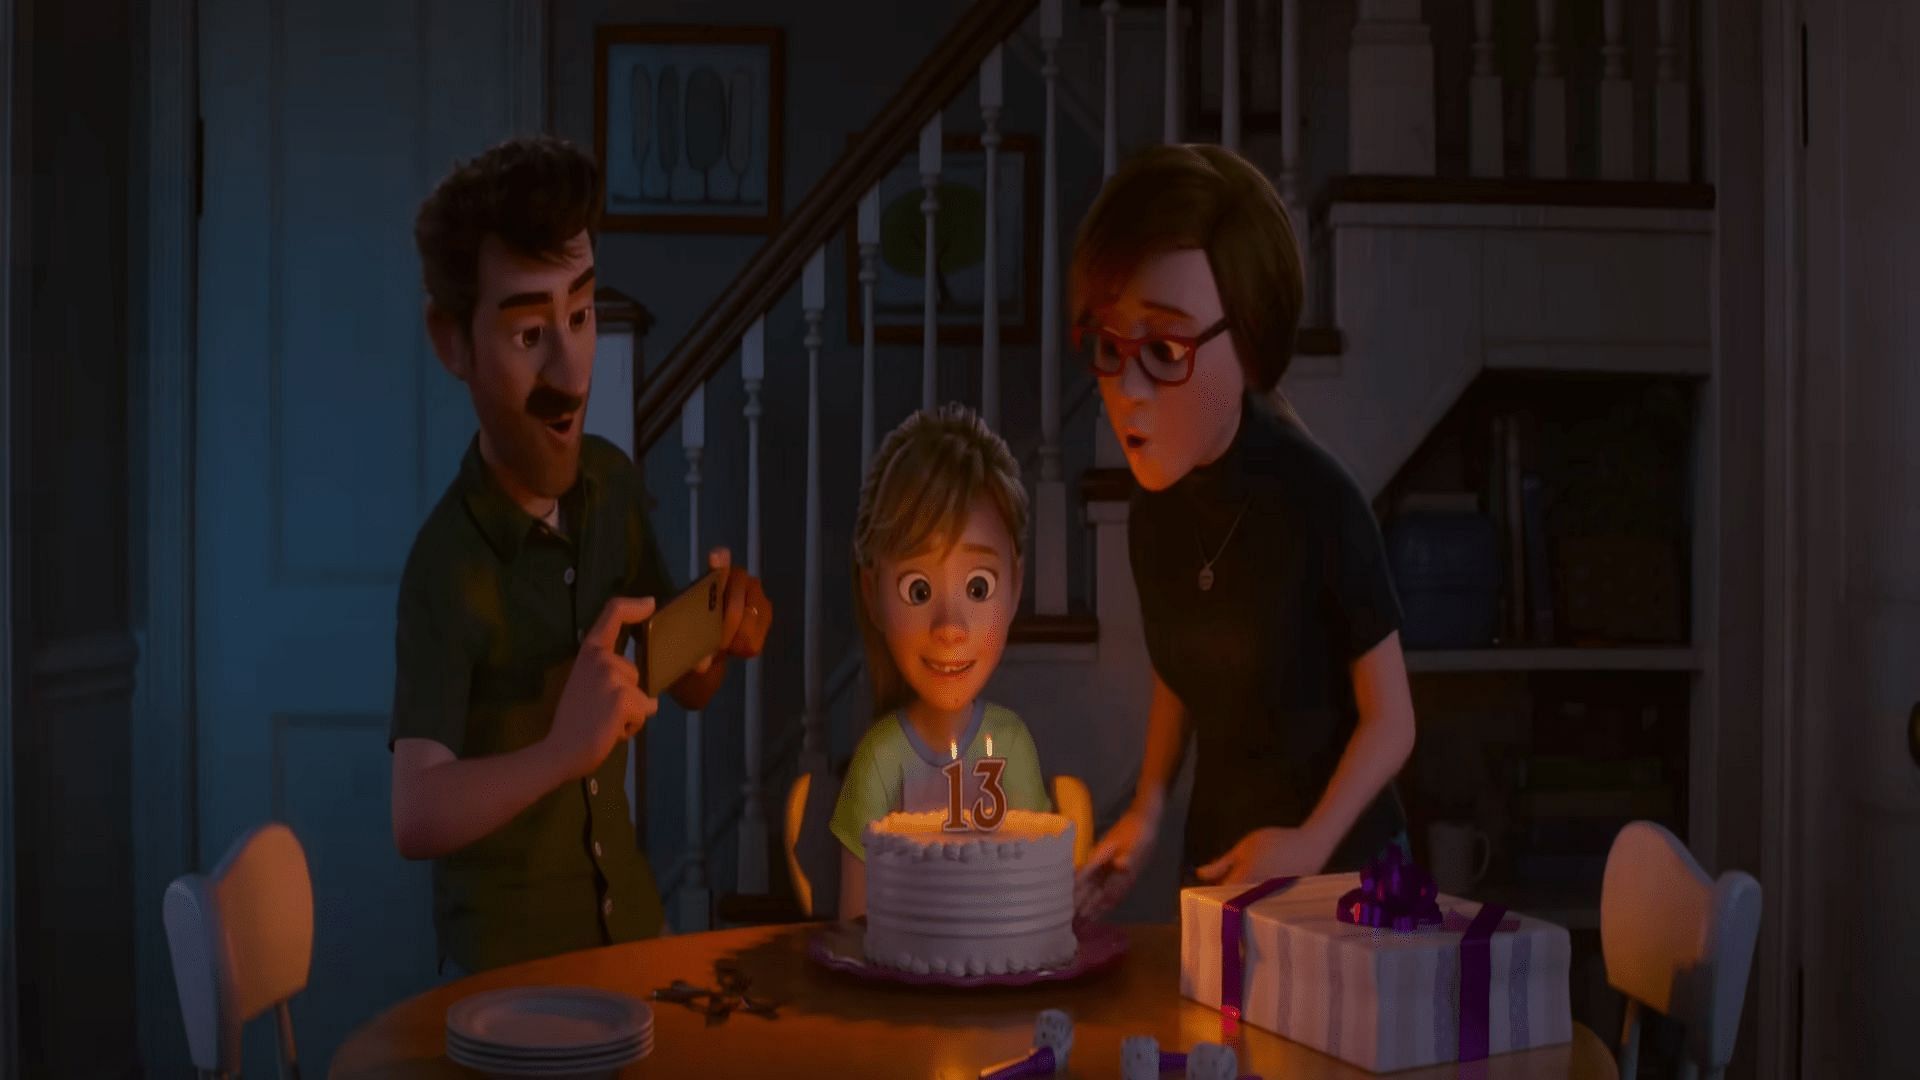 Riley is 13 years old in this film (Image by Pixar)